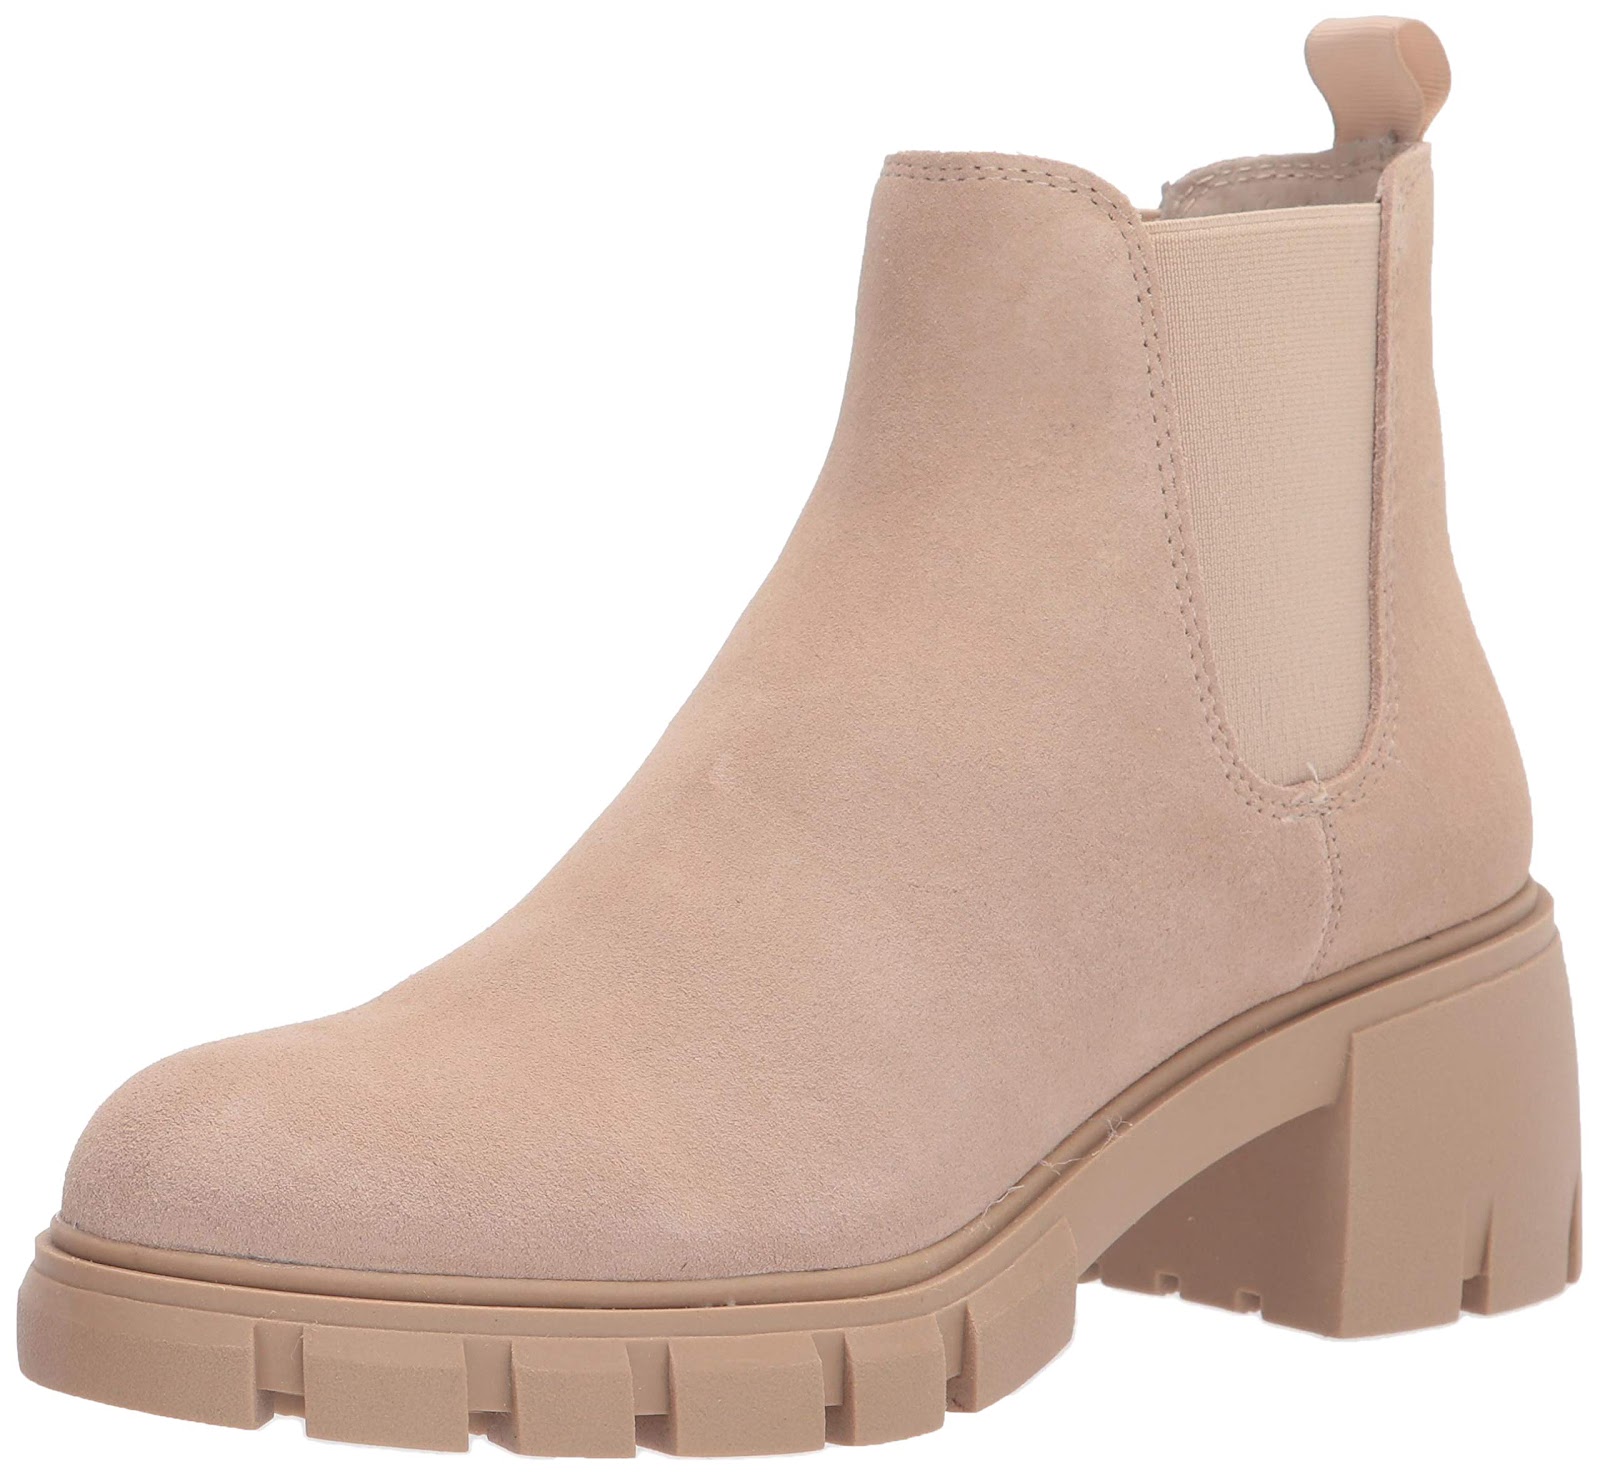 Steve Madden Women's Howler Ankle Boot 7 Sand Suede